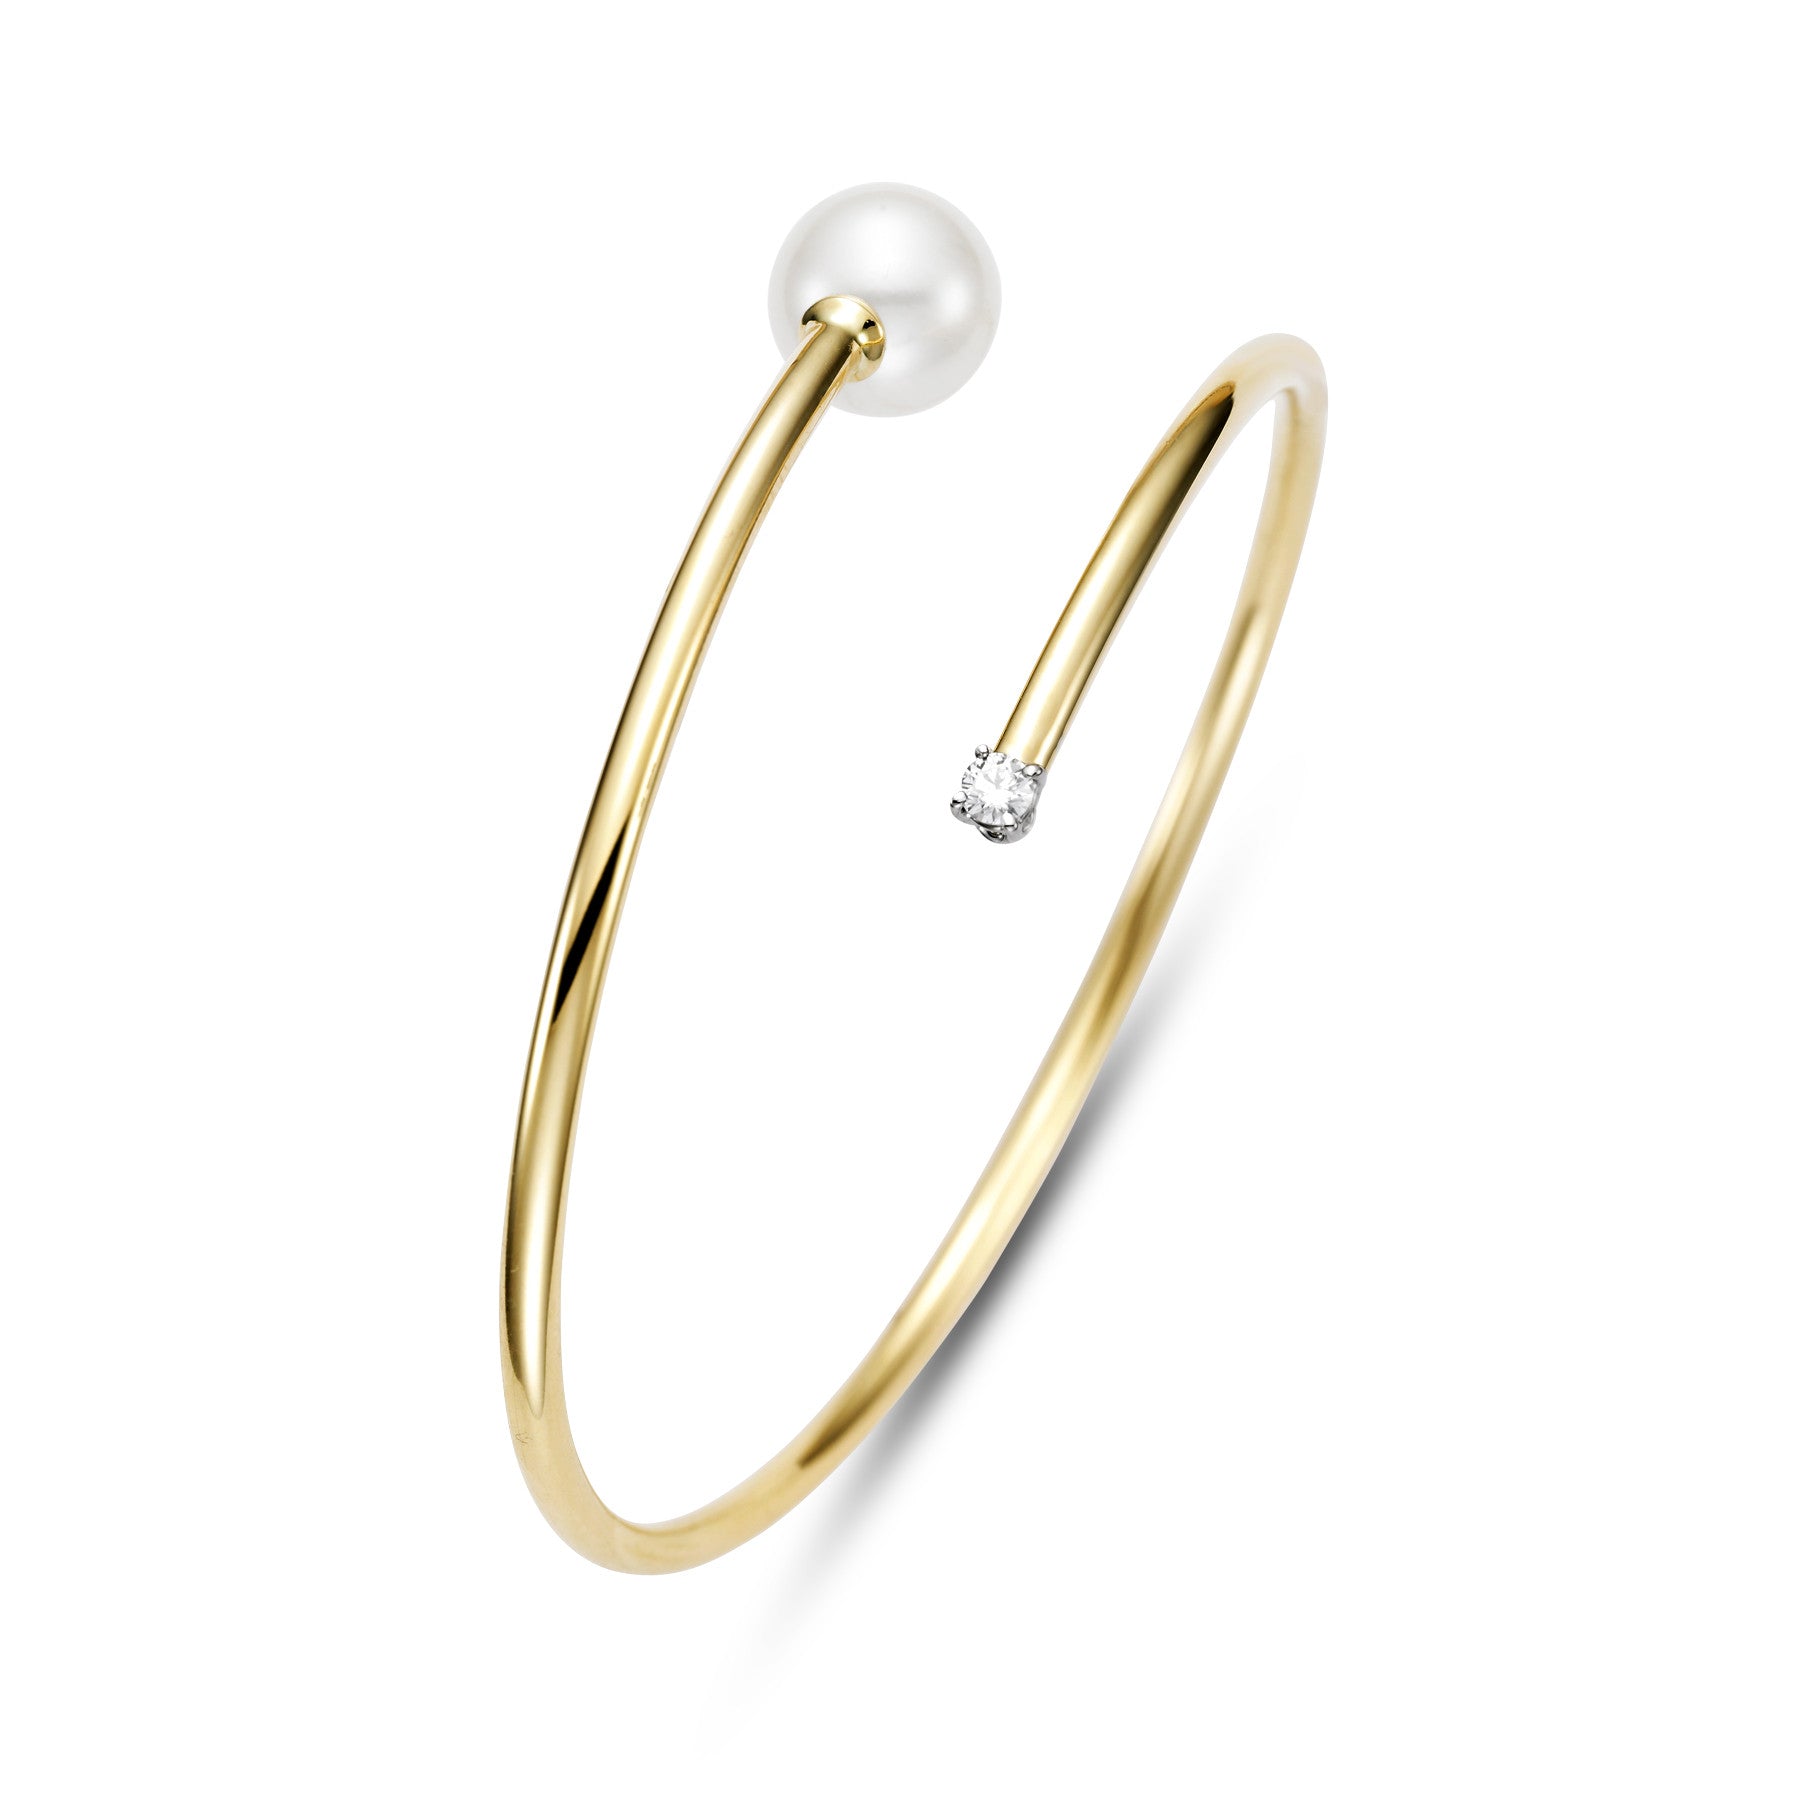 Beautiful pearl bypass bracelet in 18k yellow gold with diamond accent. 